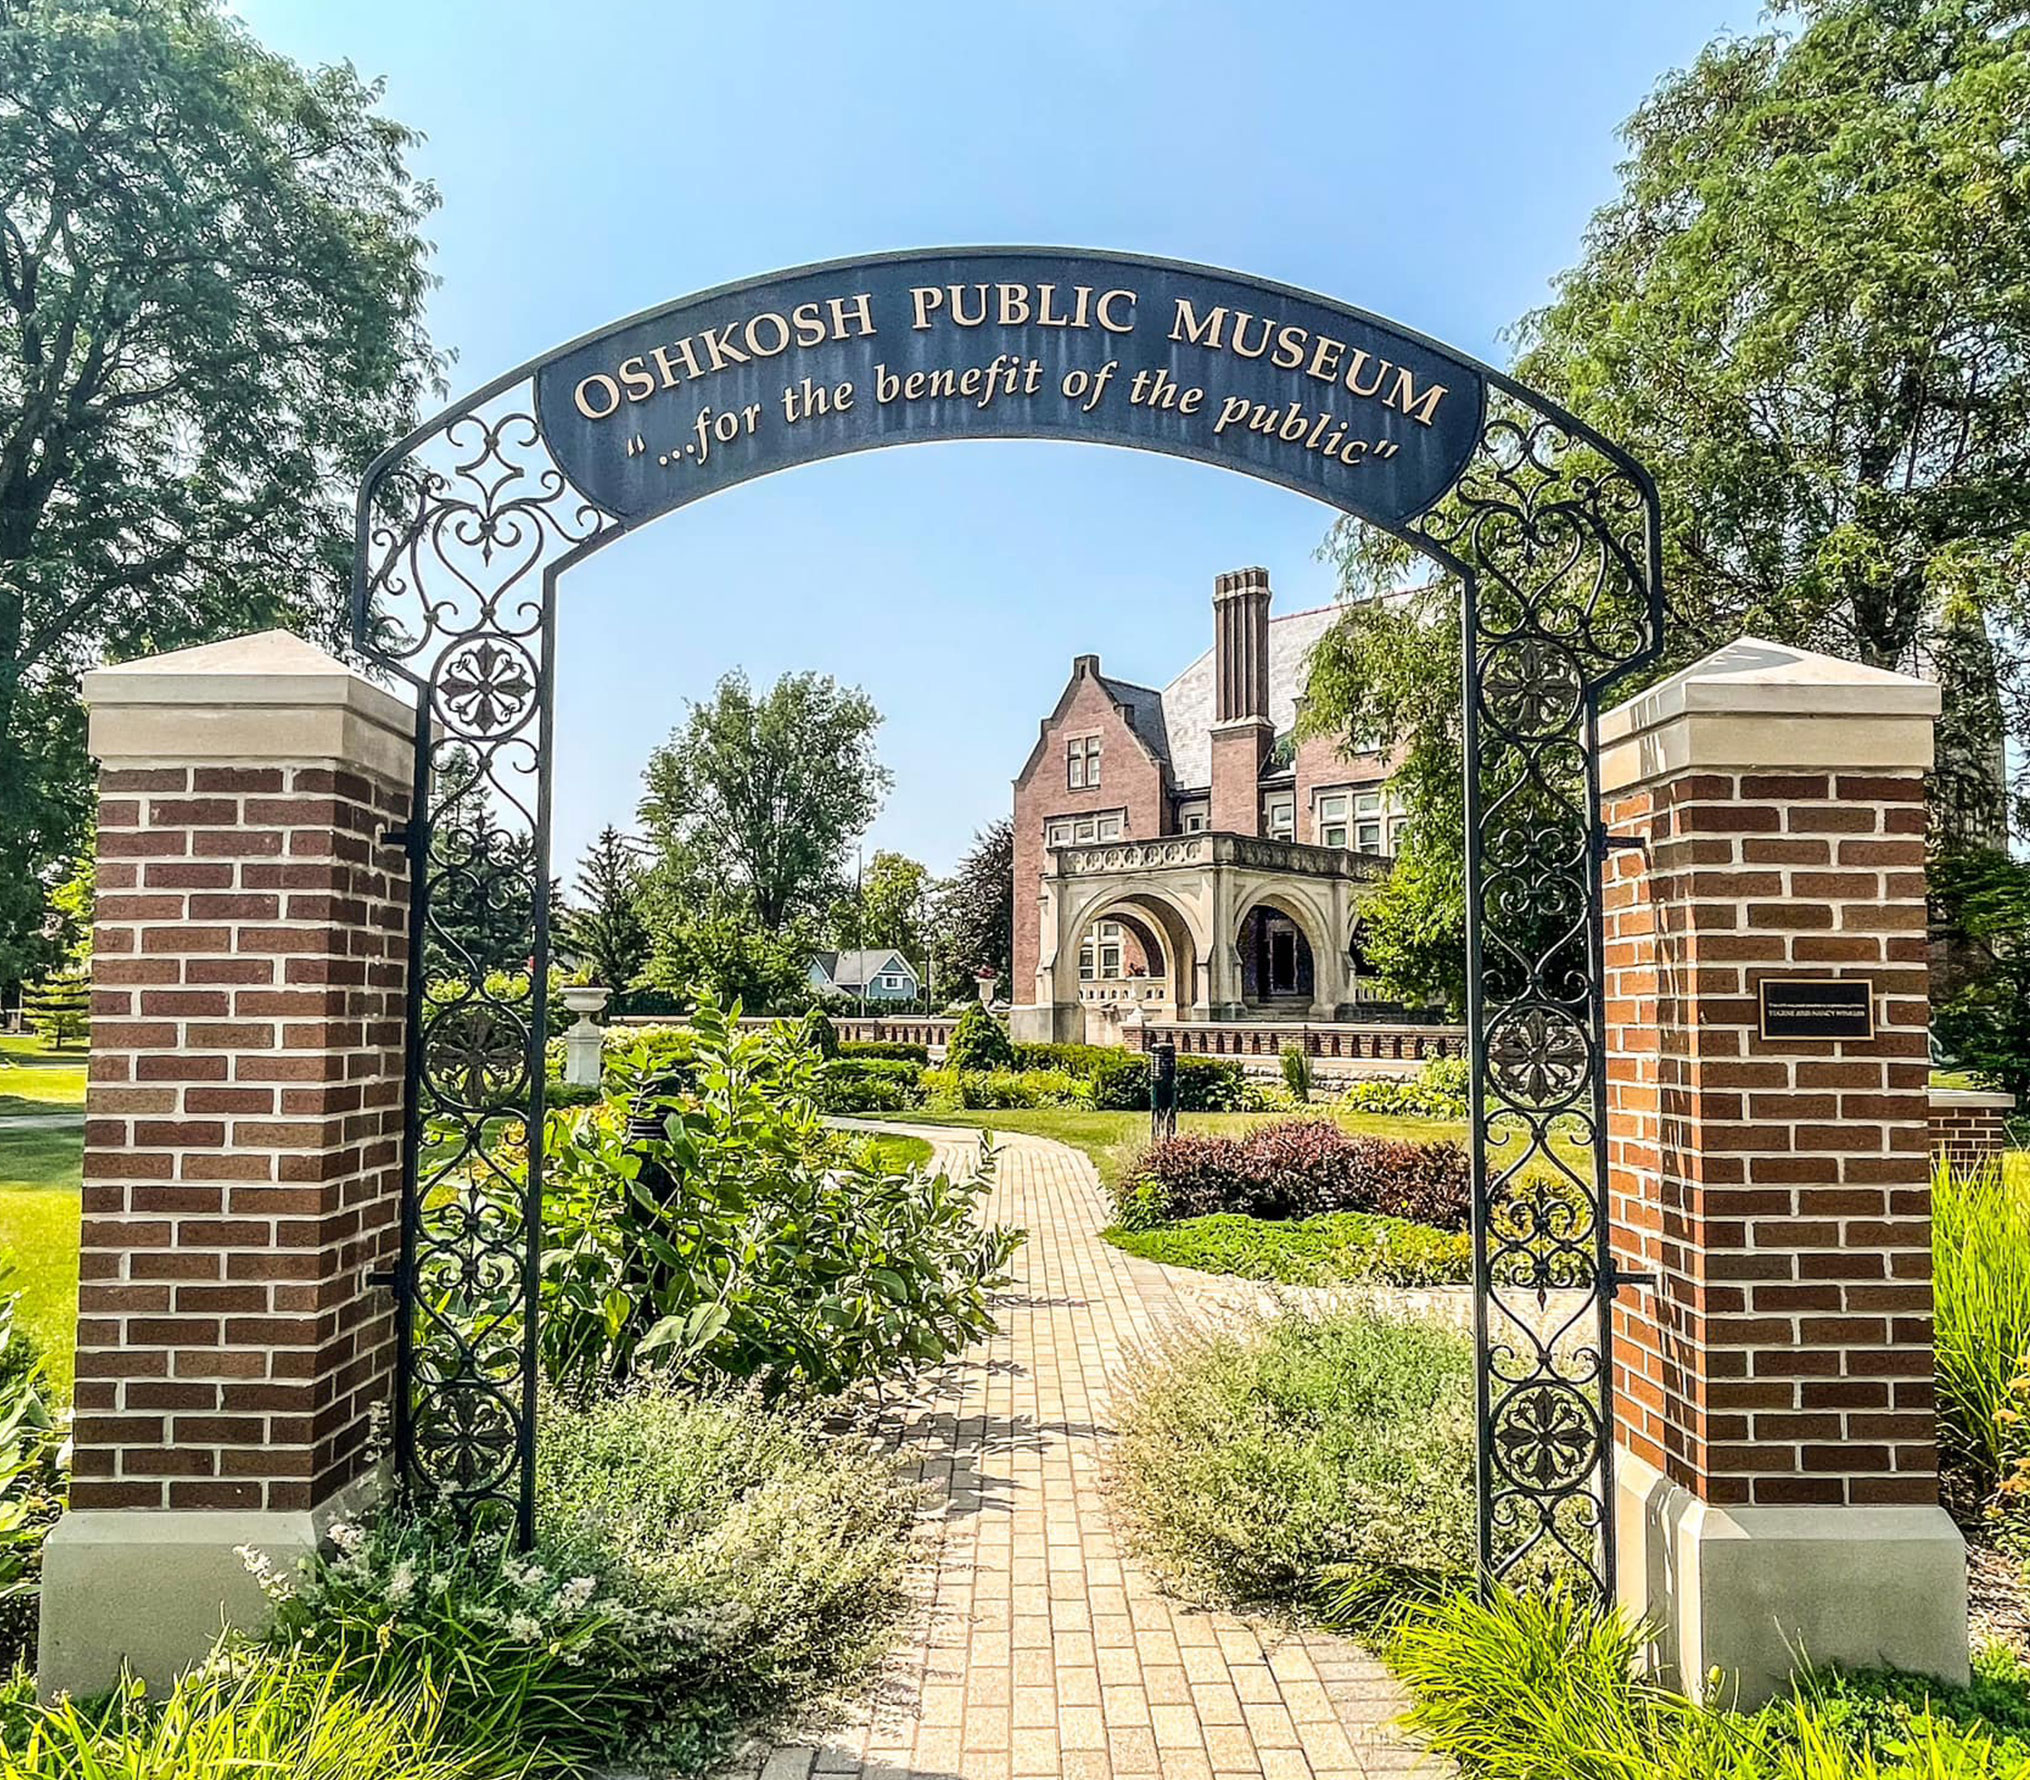 Arch and pathway outside the Oshkosh Public Museum